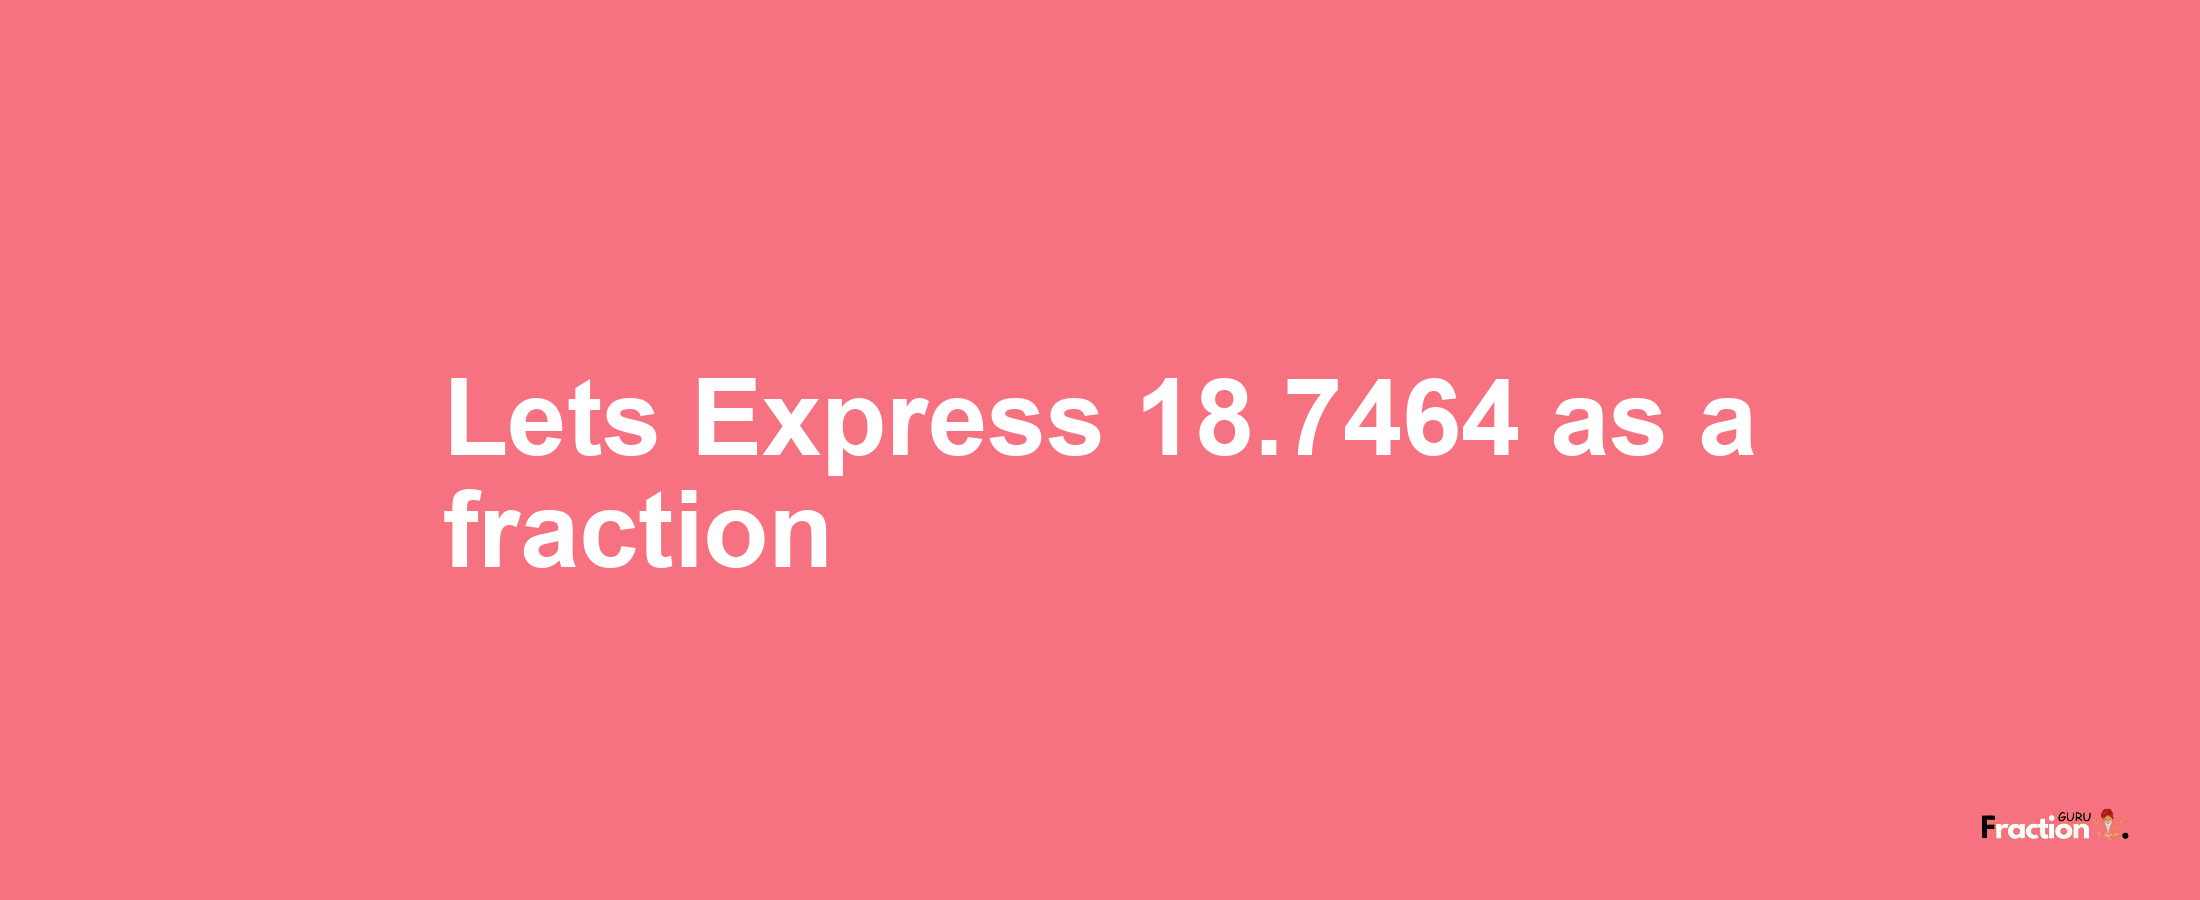 Lets Express 18.7464 as afraction